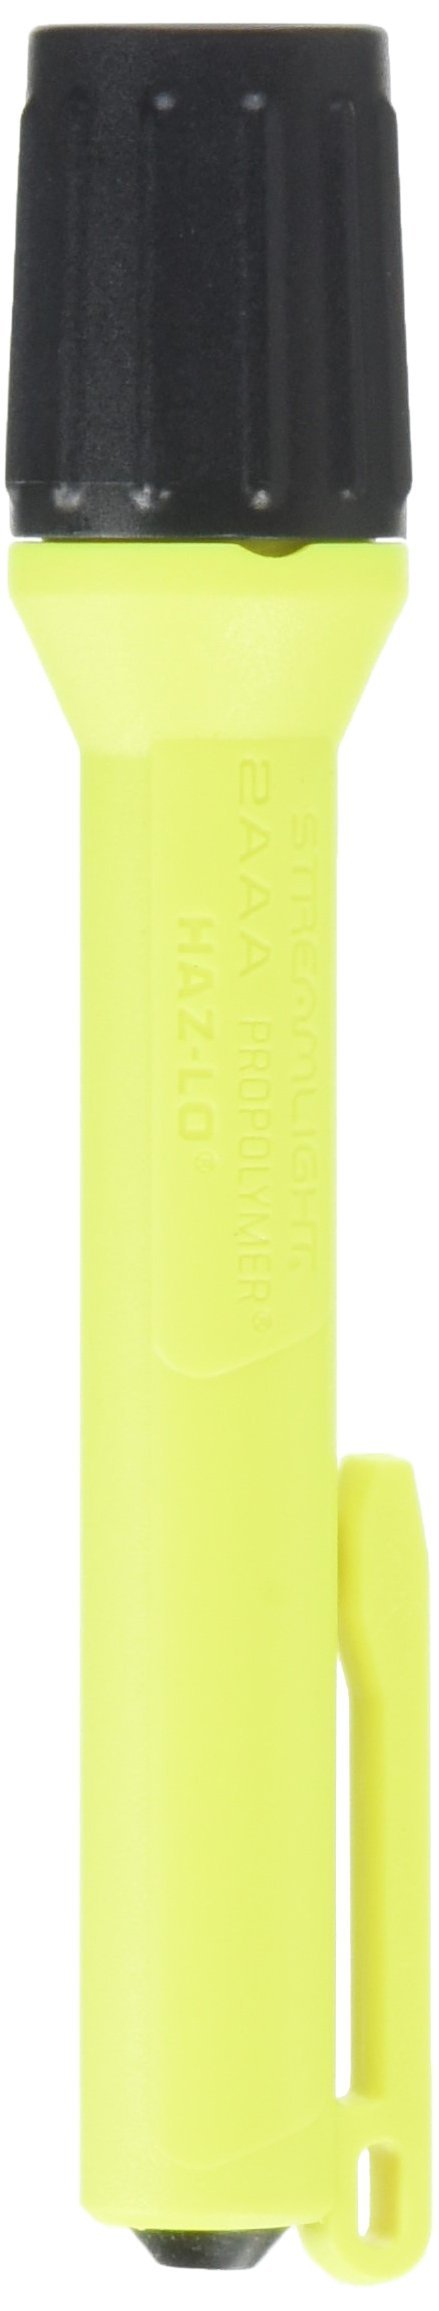 Streamlight 2AAA ProPolymer HAZ-LO with alkaline batteries, 66500 - Clam - Yellow Clamshell Packaging